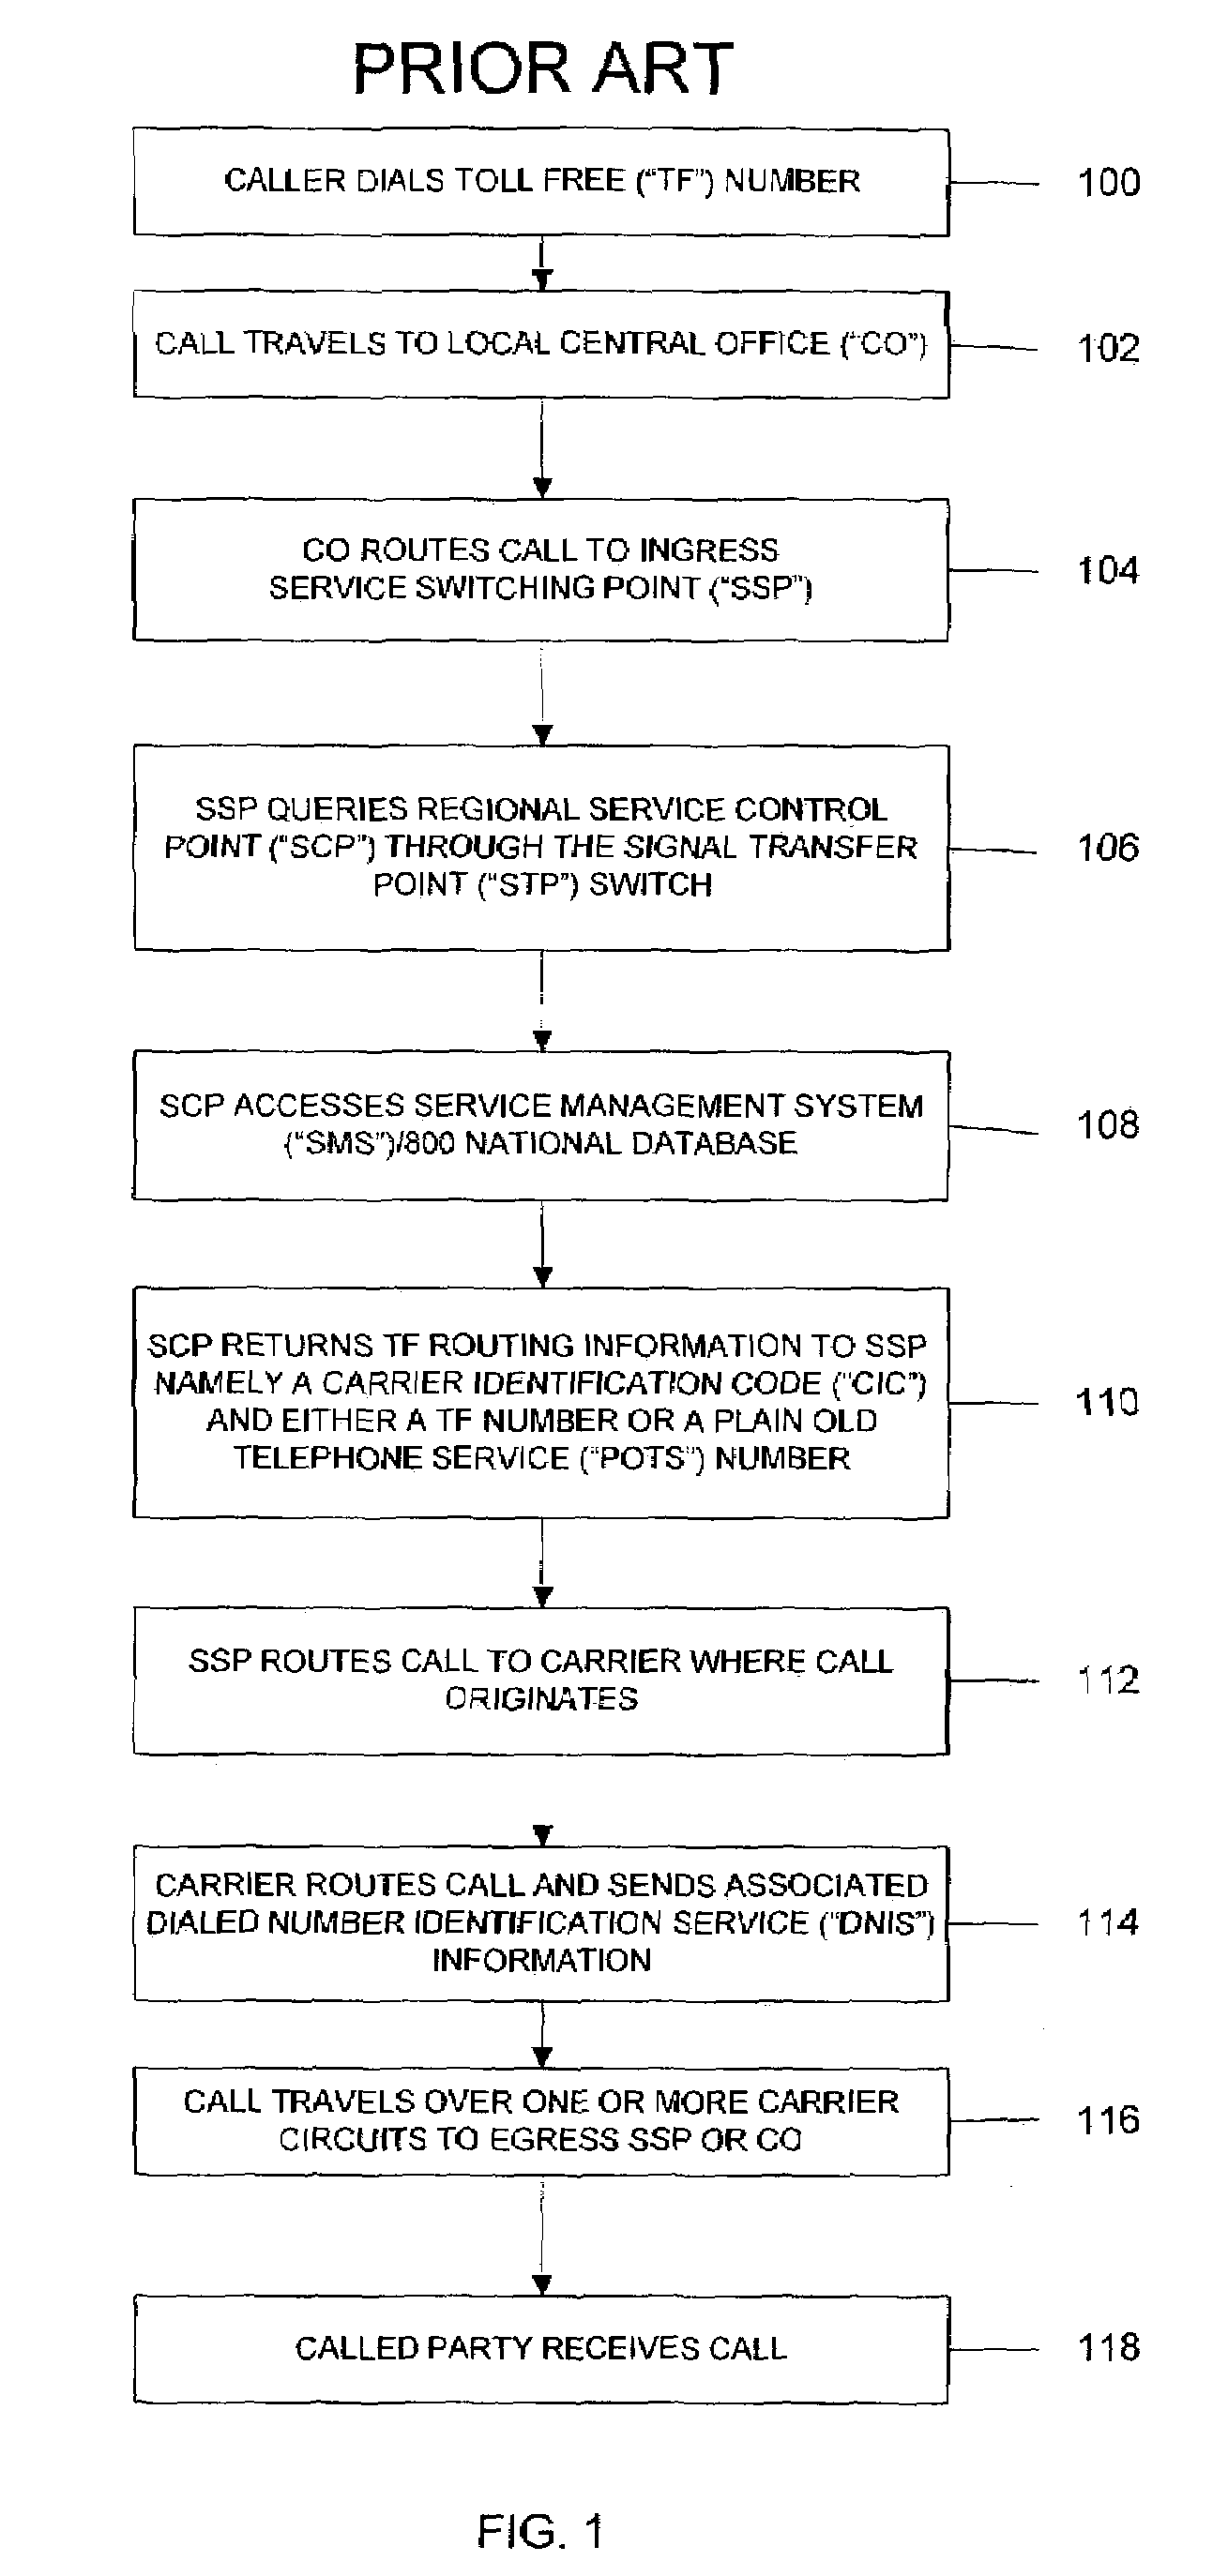 System and method for enhanced origination services for toll free telephone calls